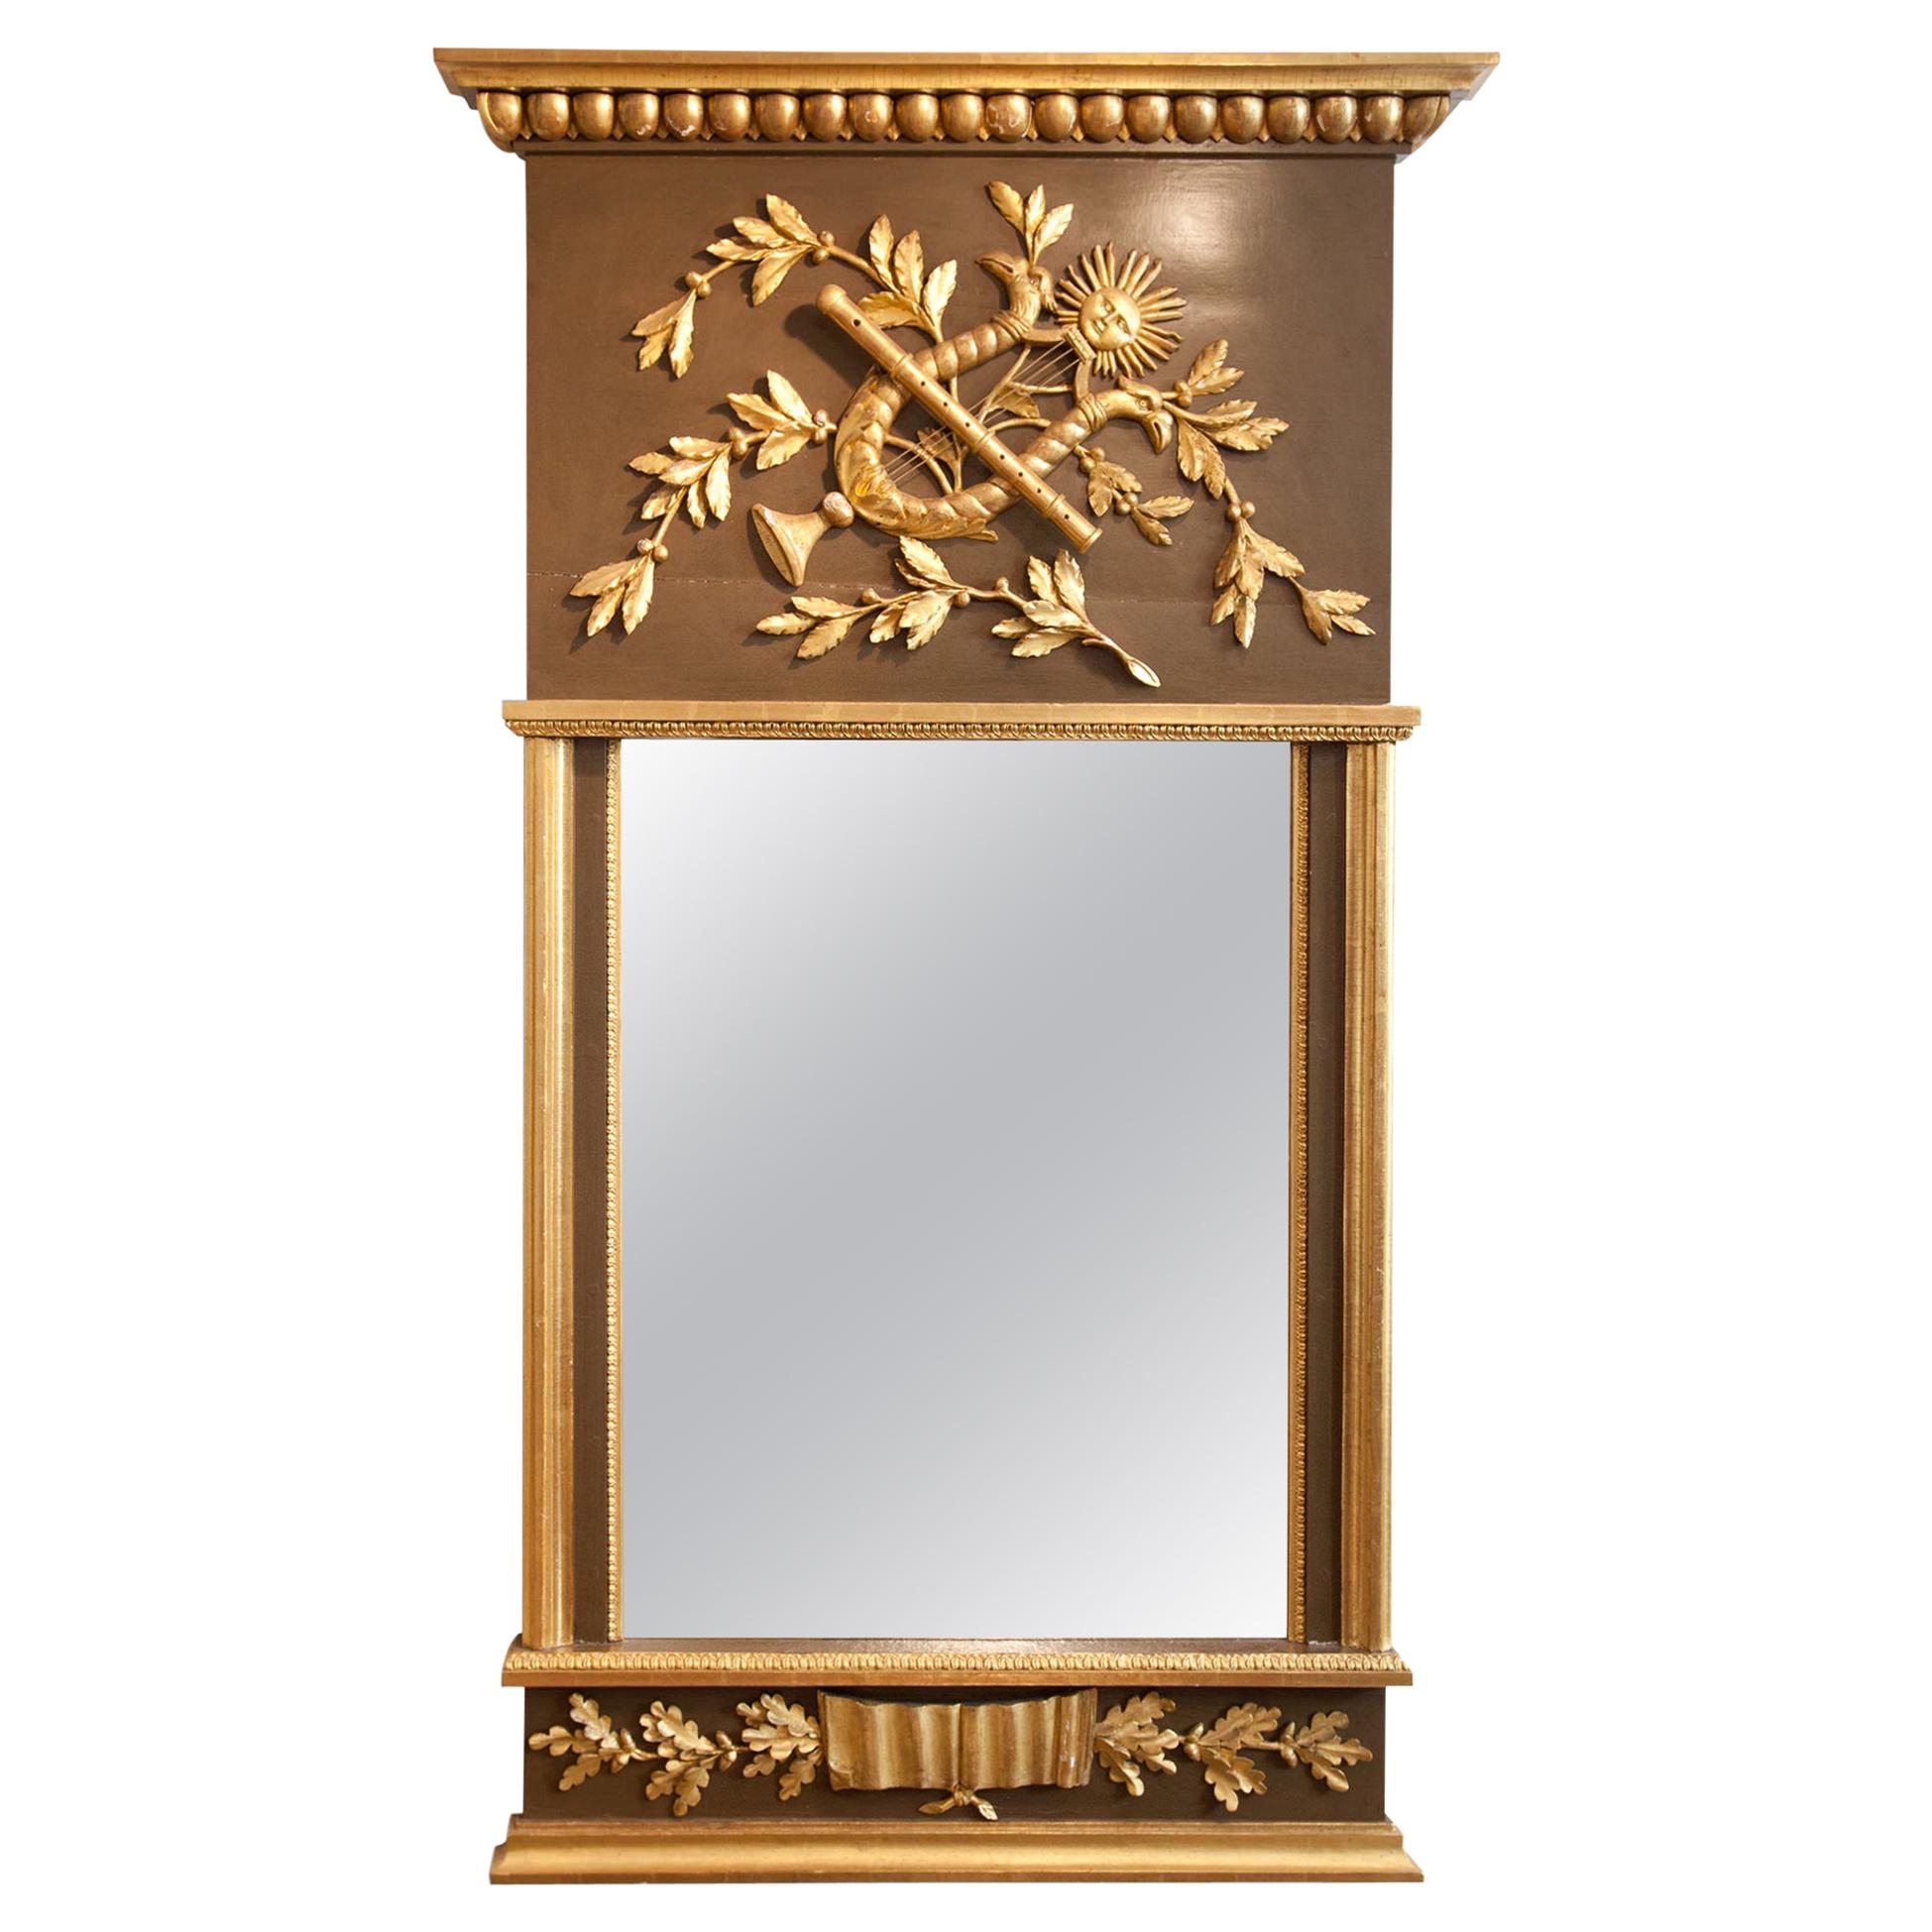 Neoclassical Wall Mirror with Gilt Lyre Ornament, France, circa 1800